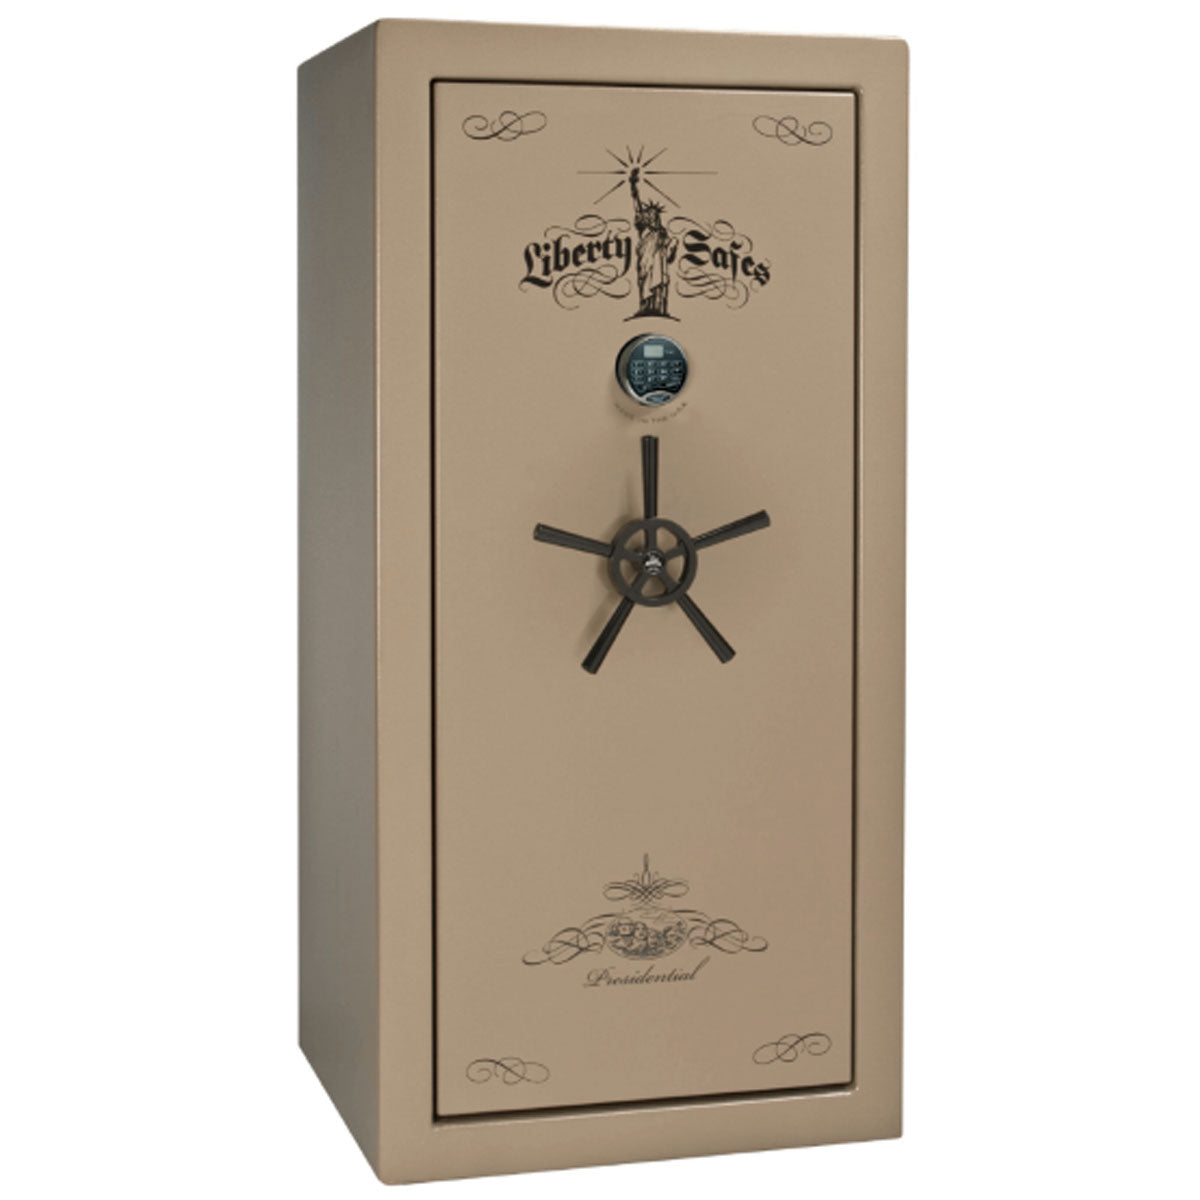 Liberty Safe Presidential 25 in Champagne Marble with Black Chrome Electronic Lock, closed door.